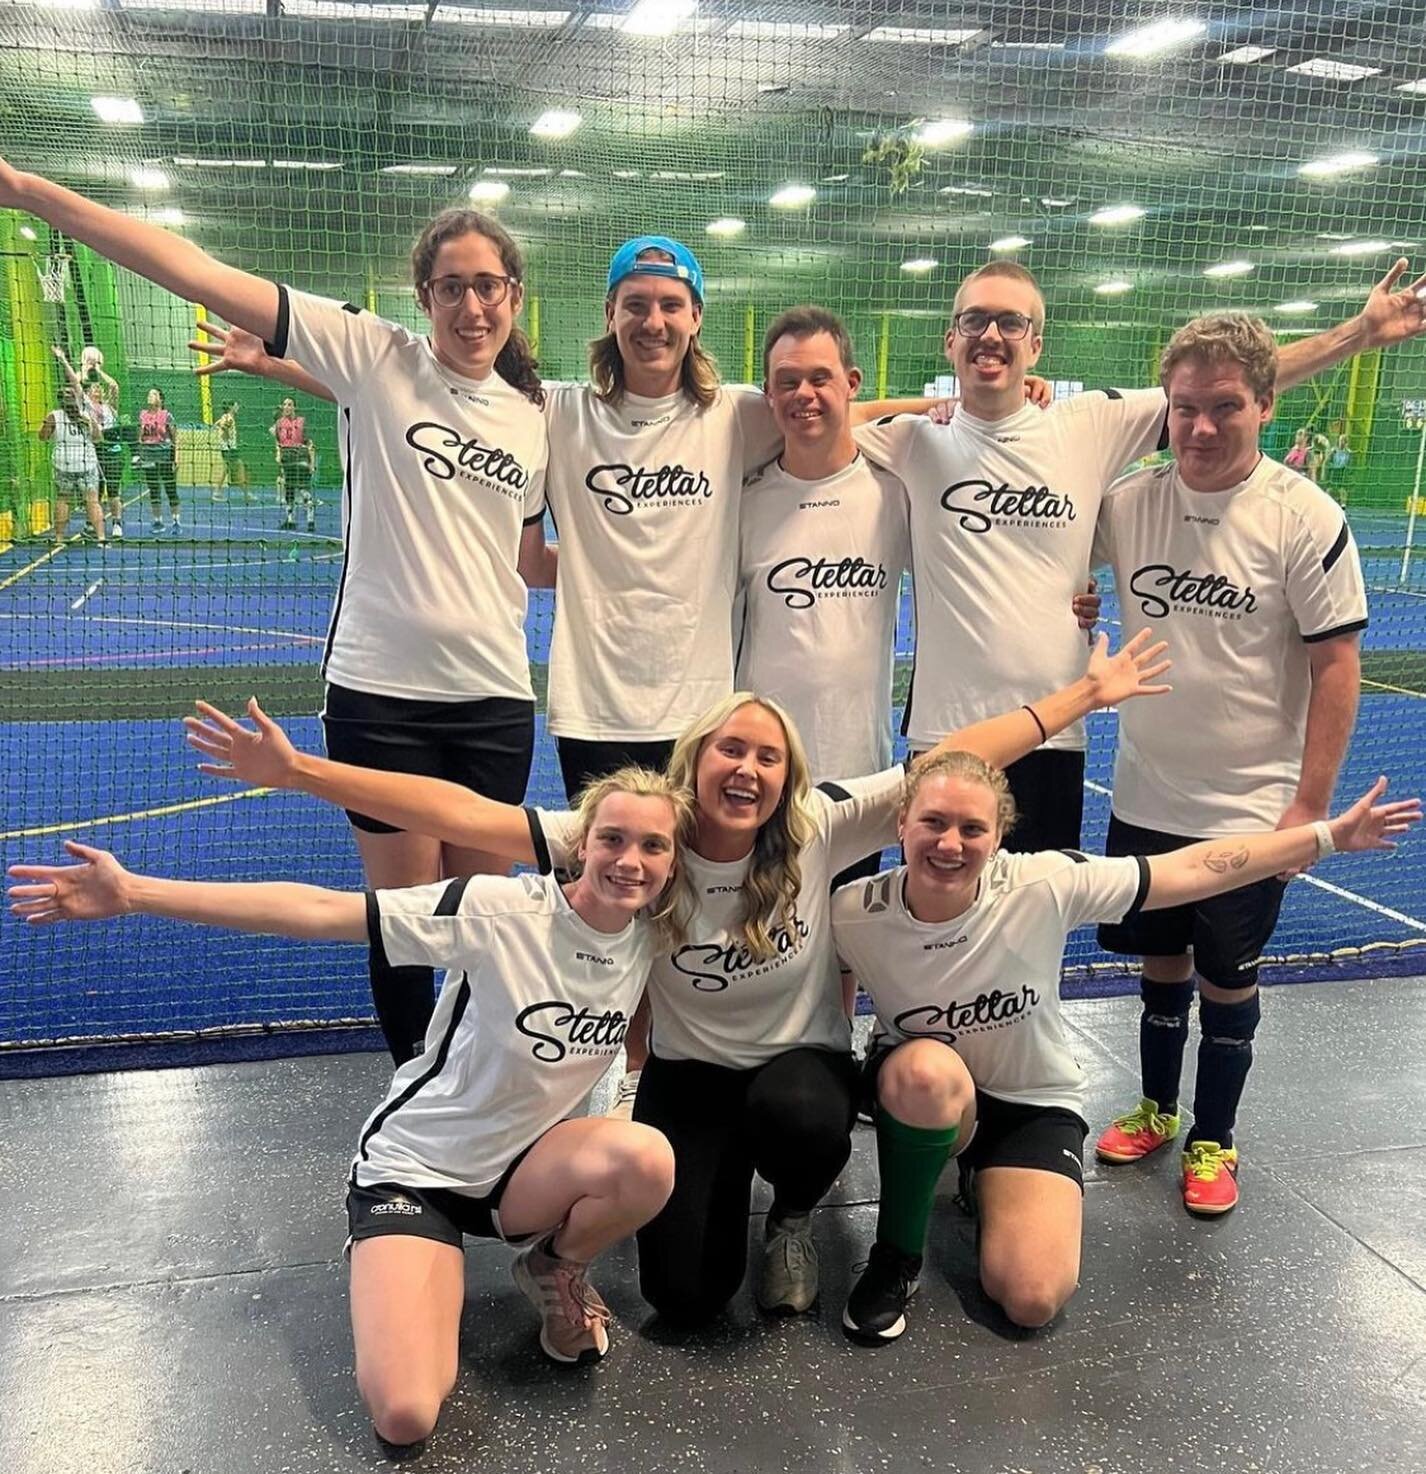 There&rsquo;s lots of talk about the Subway Socceroos today, but have you heard about the Stellar Socceroos? 

They are dominating on the indoor pitch in their new kit! 

🖤🤍 @stellar.experiences 
💙💛 @cronullarsl 

#friendsbythebeach #stellarexper